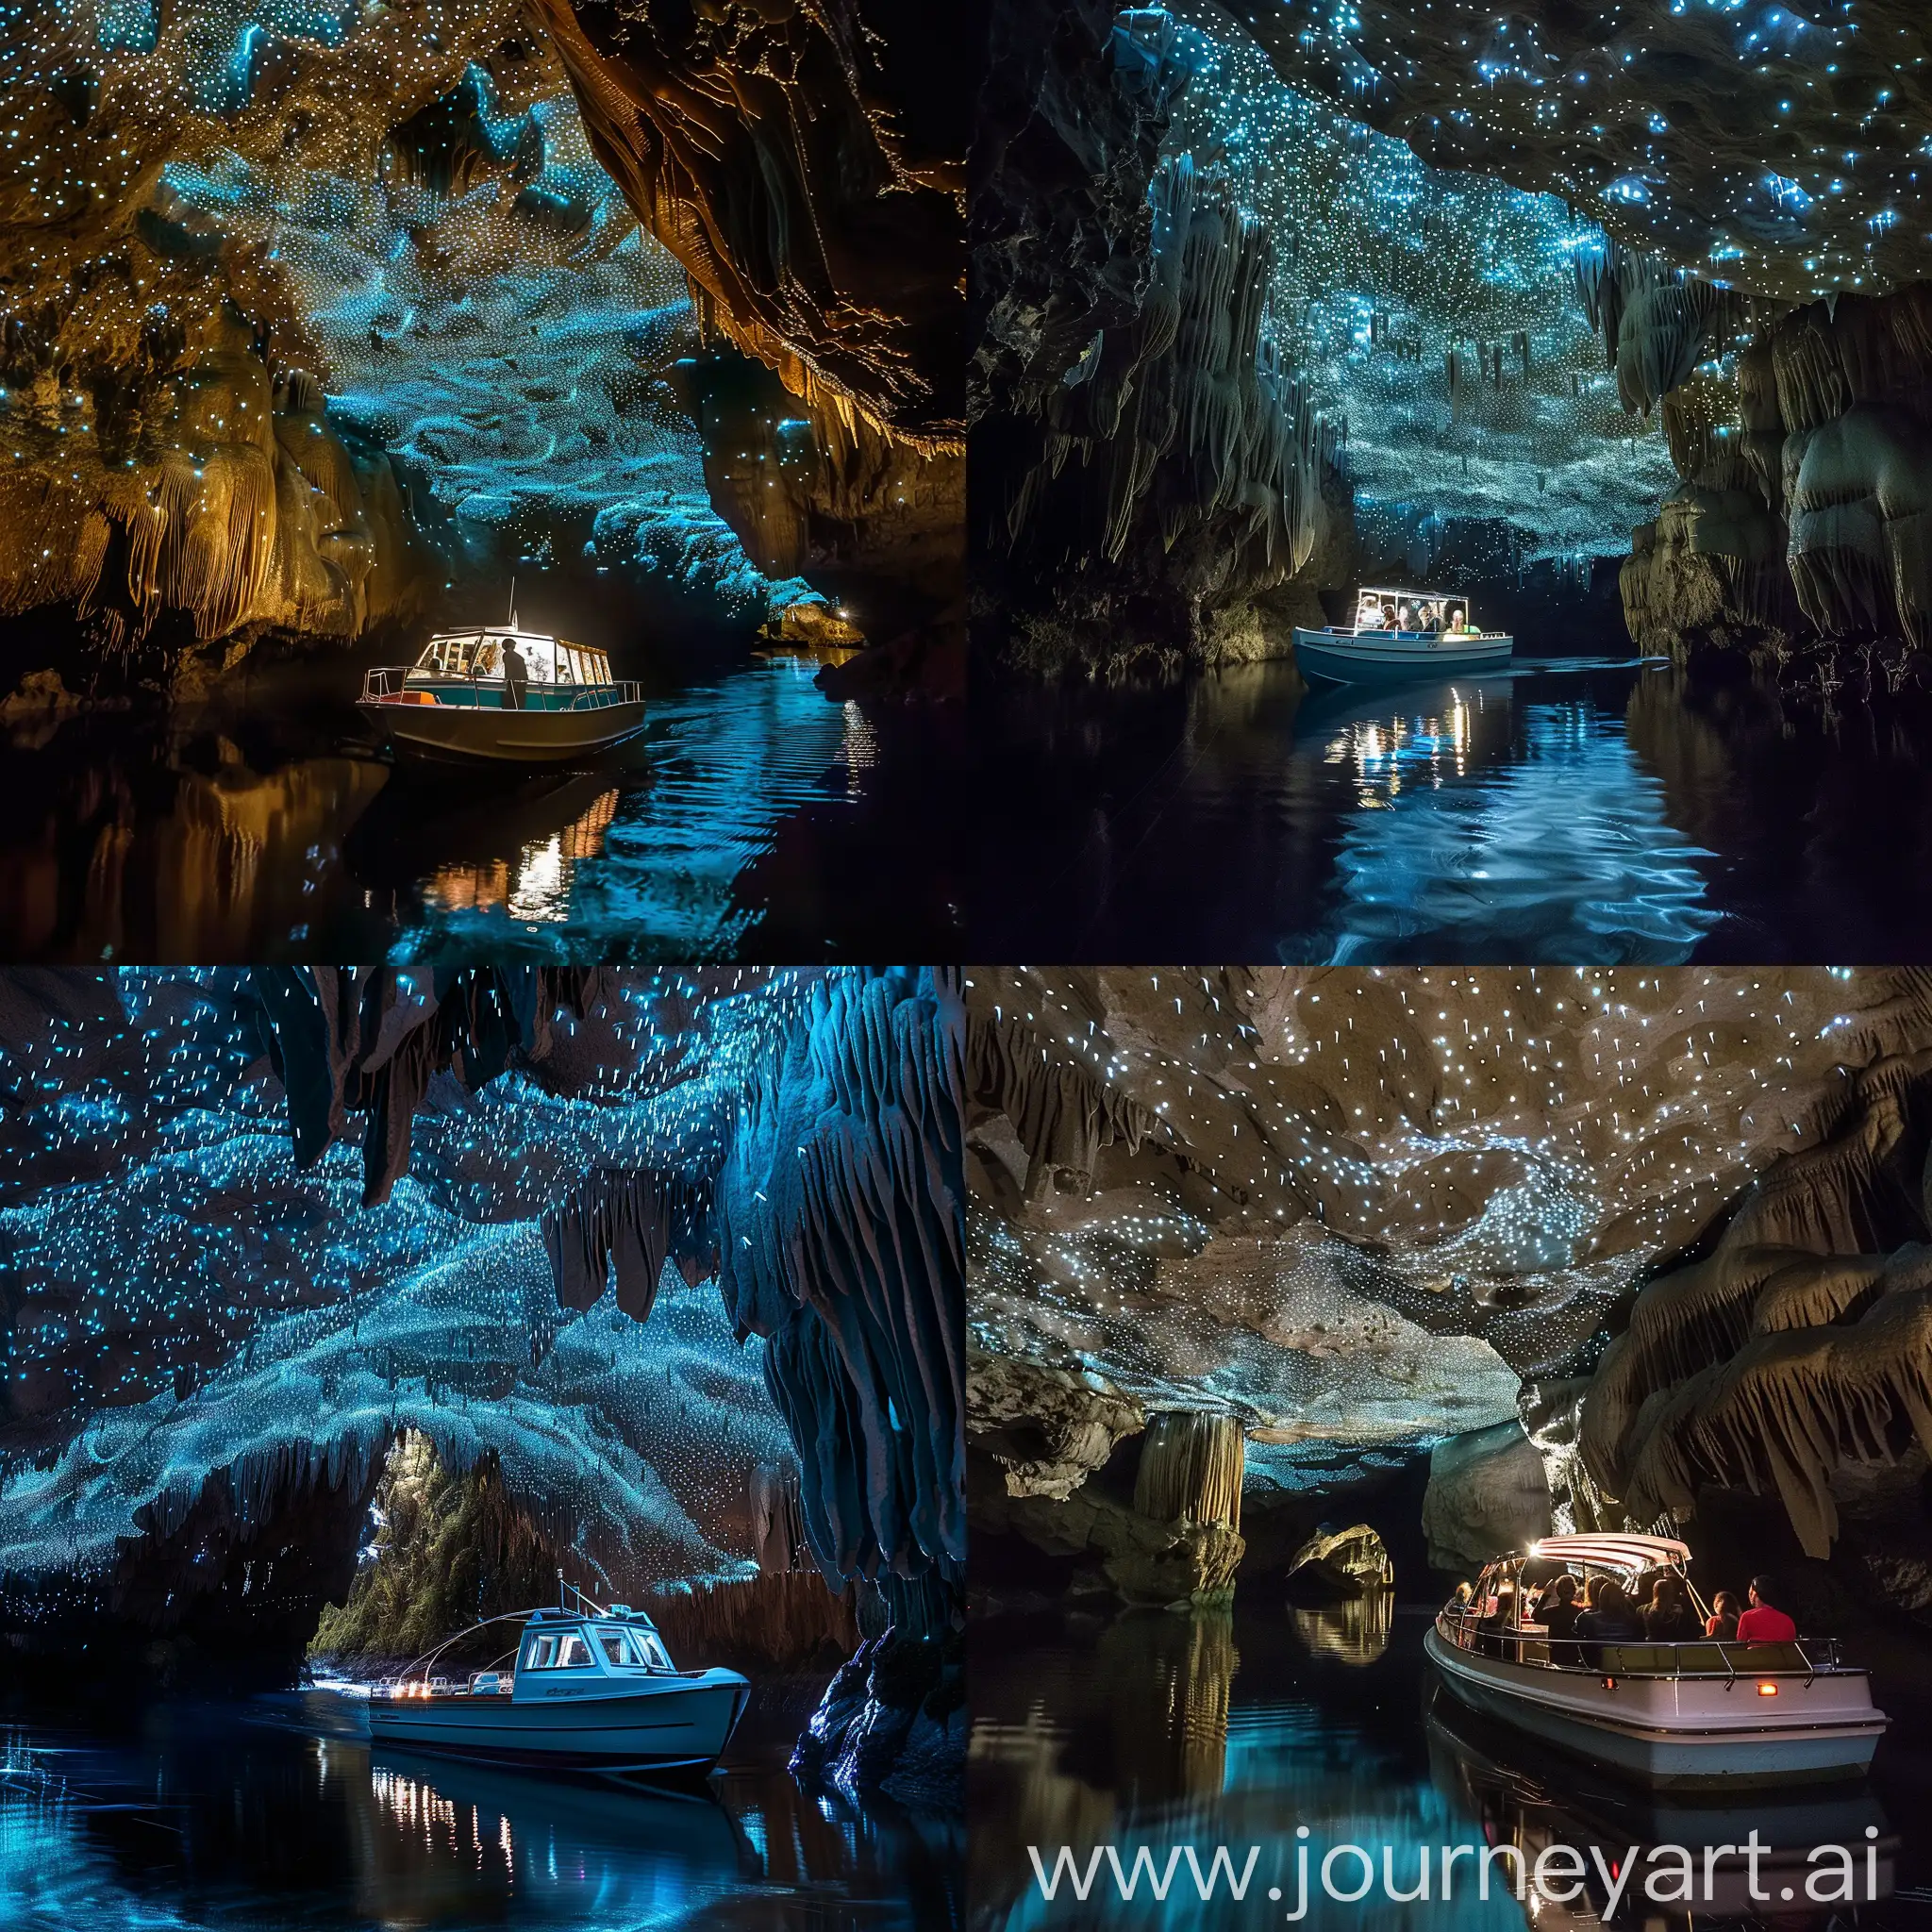 A boat journey through the illuminated caves of Waitomo, with thousands of glowworms creating a mesmerizing display overhead. The image captures the ethereal beauty and sense of wonder that defines this unique destination.